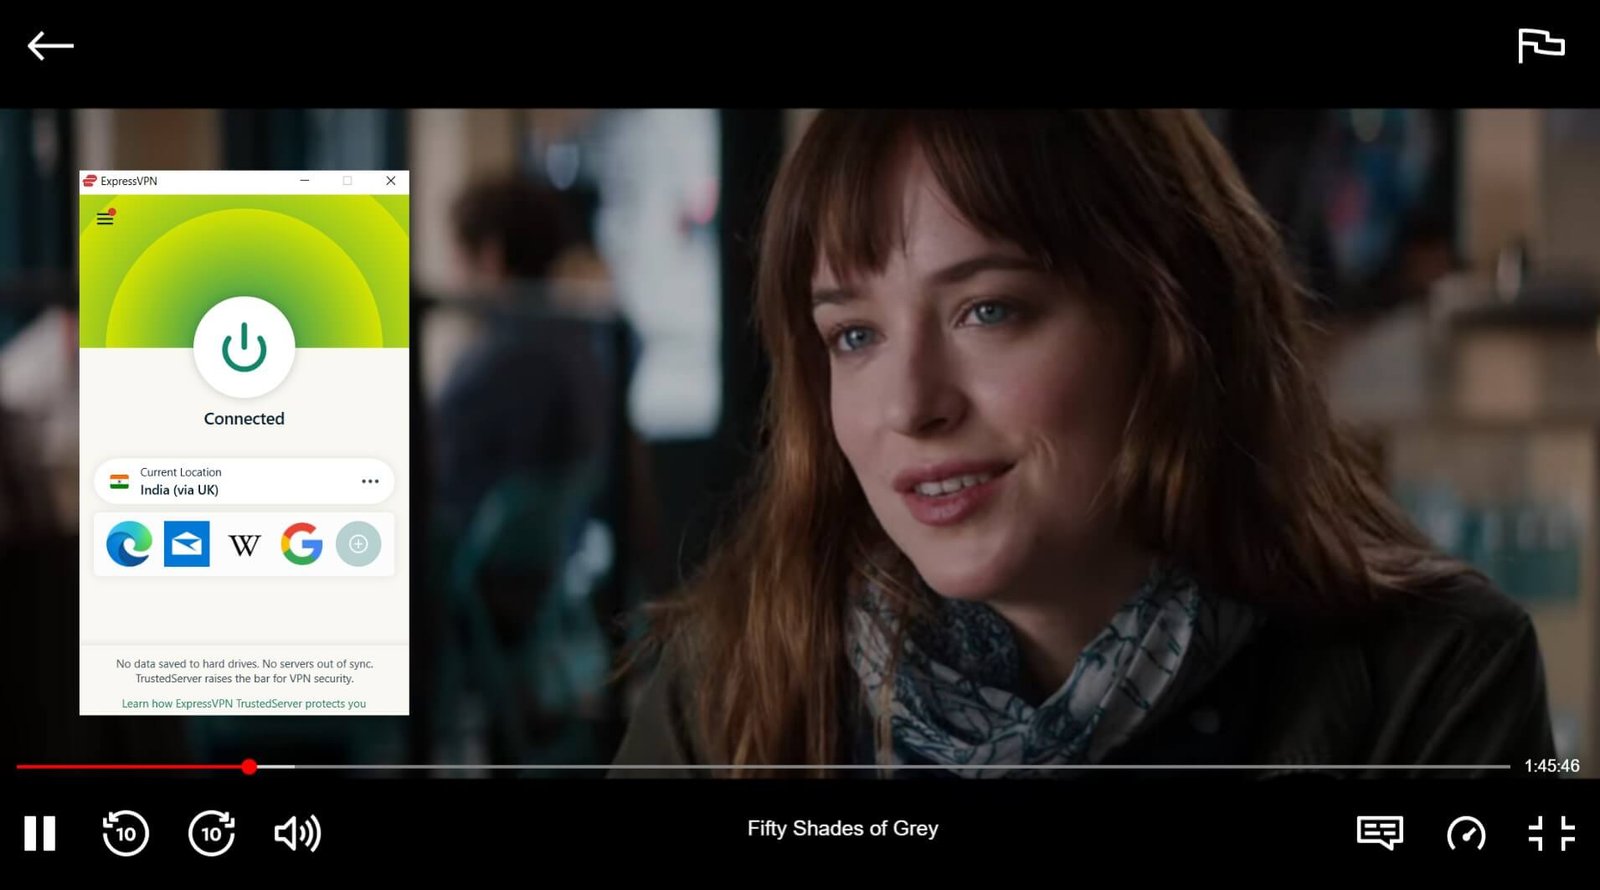 image showing Fifty Shades of Grey movie streaming on Netflix from the US